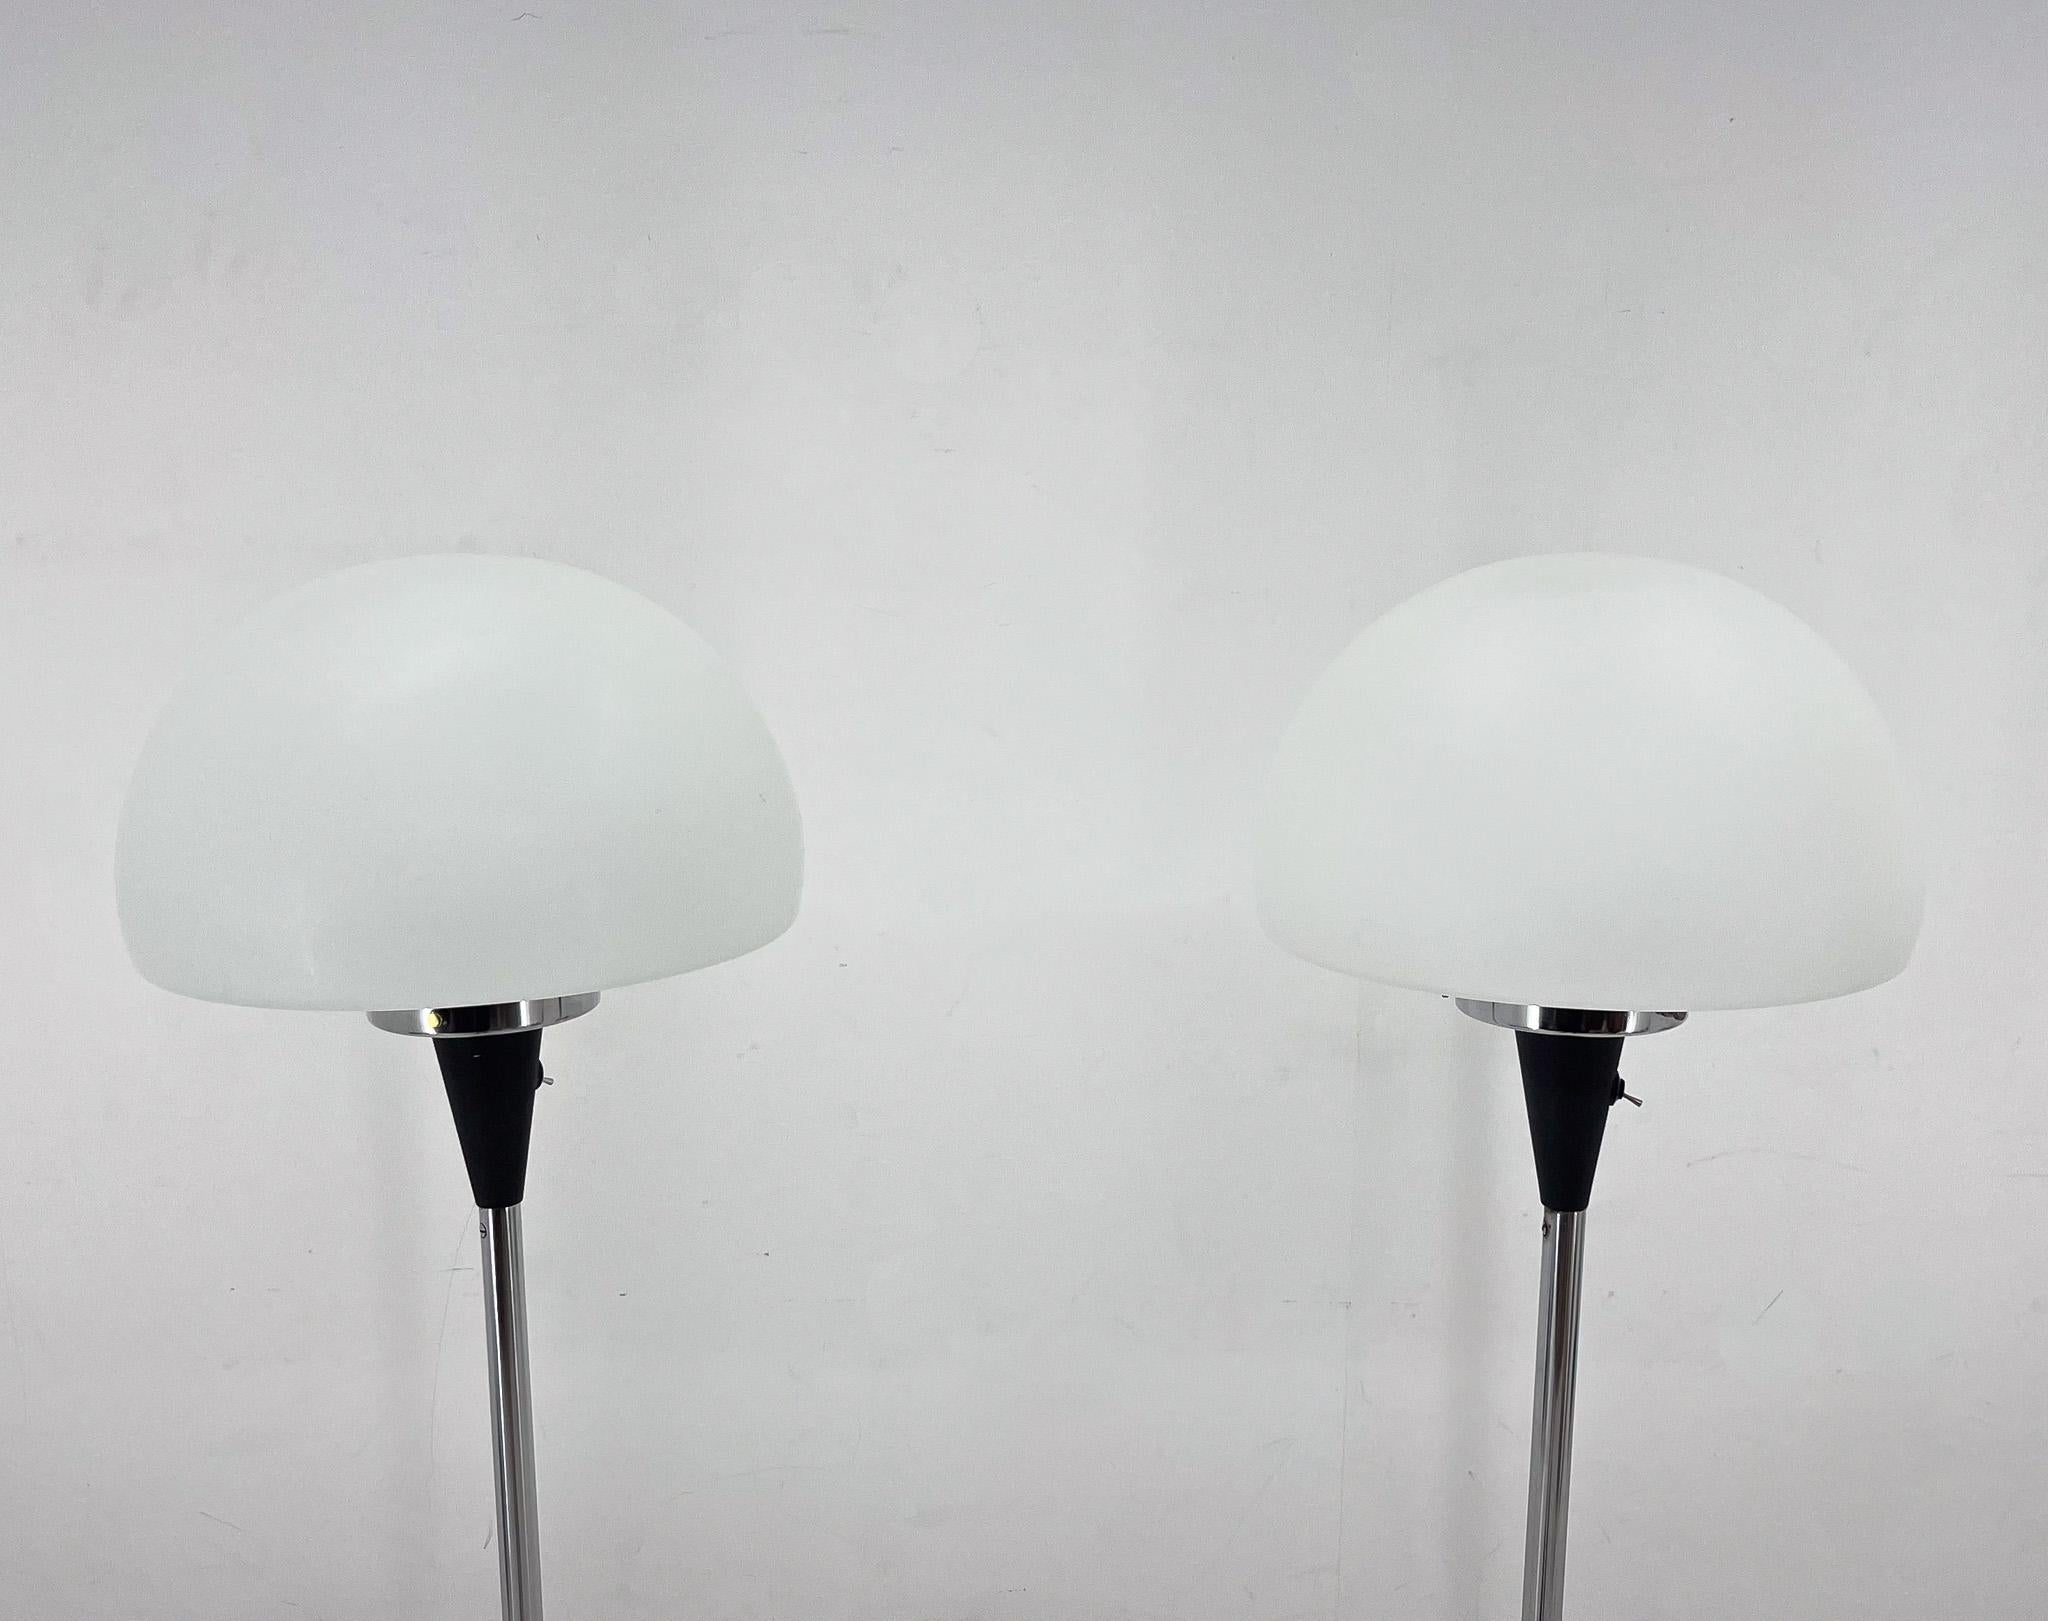 Czech Pair of Two Floor Lamps by Jaroslav Bejvl for Lidokov, 1960s For Sale